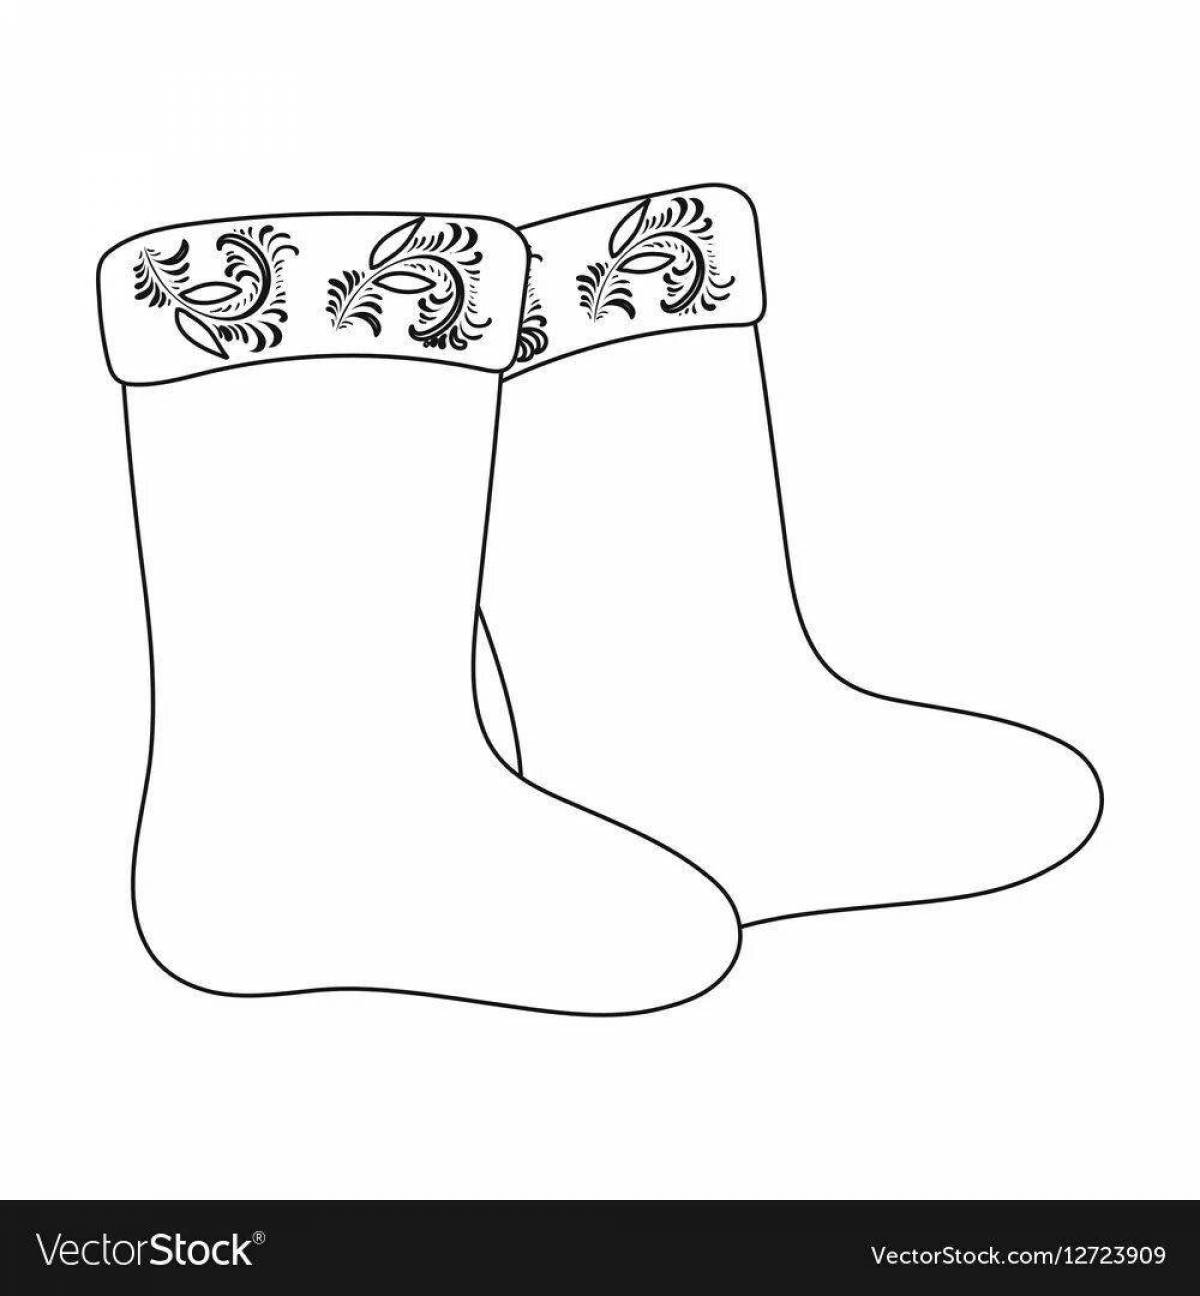 Colouring page with spectacular boot pattern